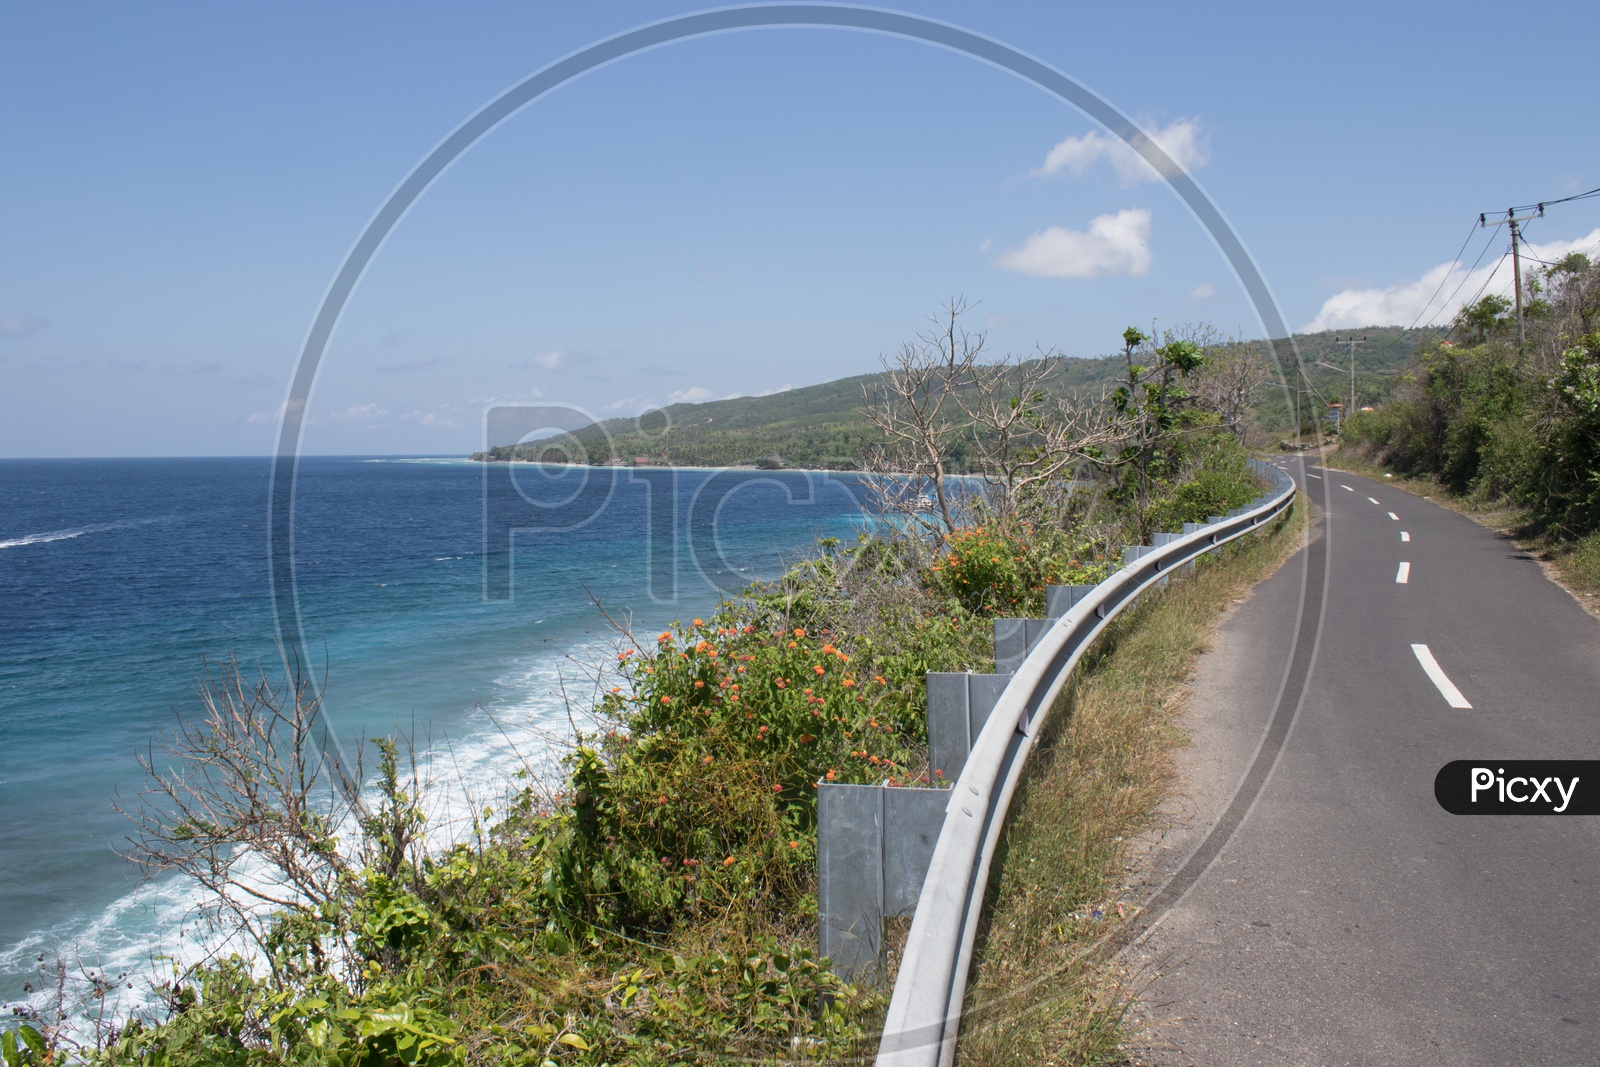 Roadway of Bali,Indonesia / Beach along the Road in Bali,Indonesia